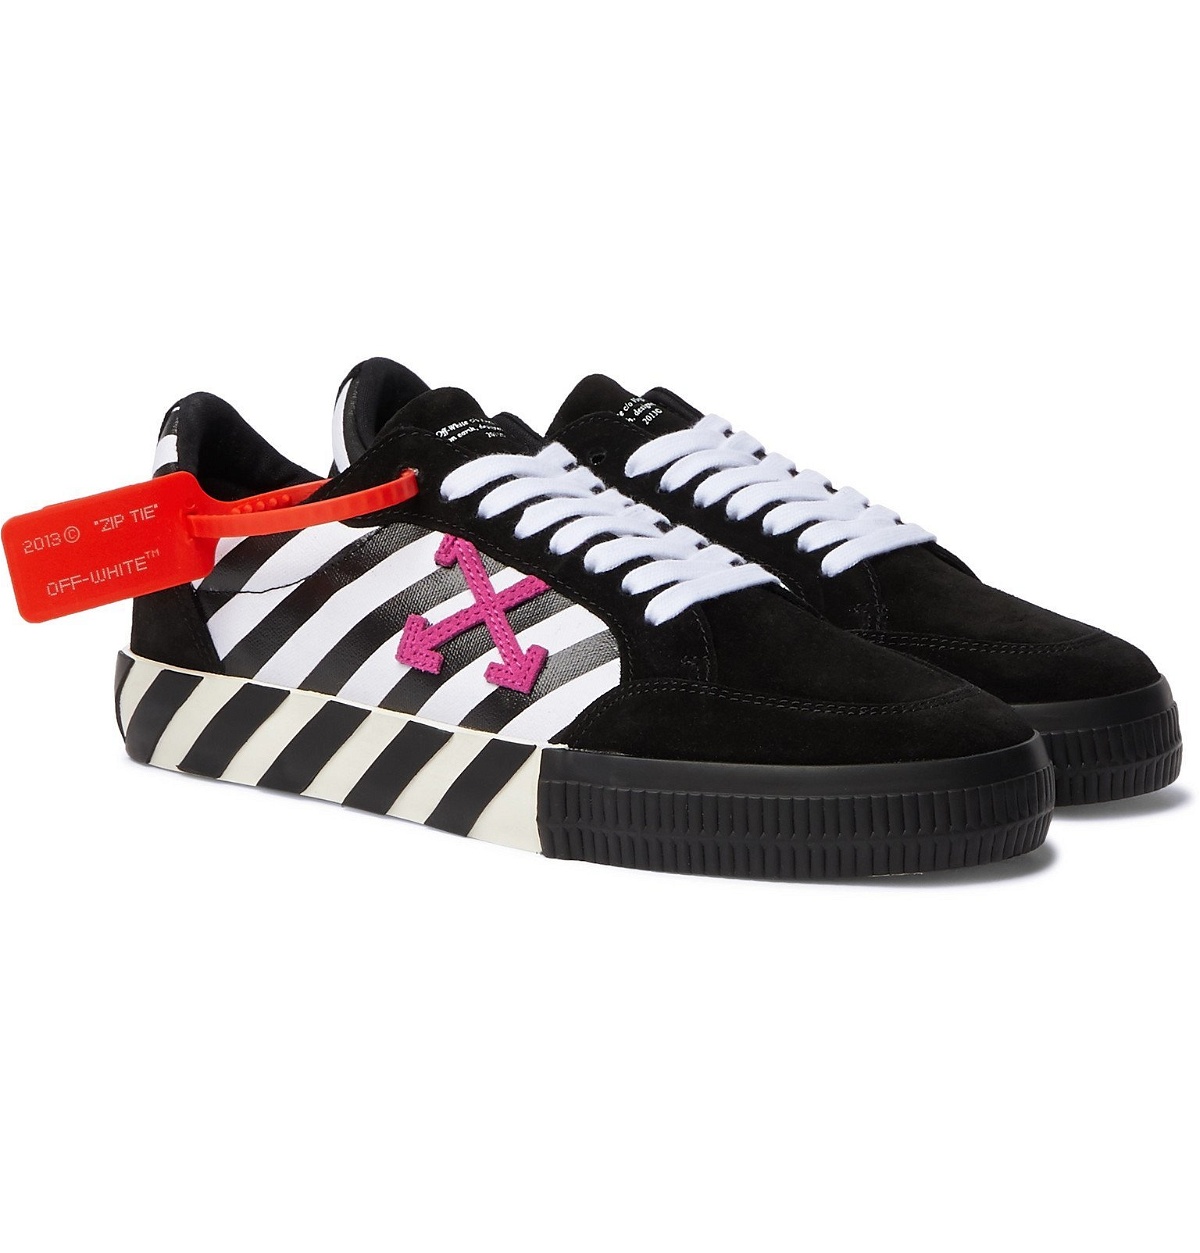 Off-White - Striped Canvas and Suede Sneakers - Black